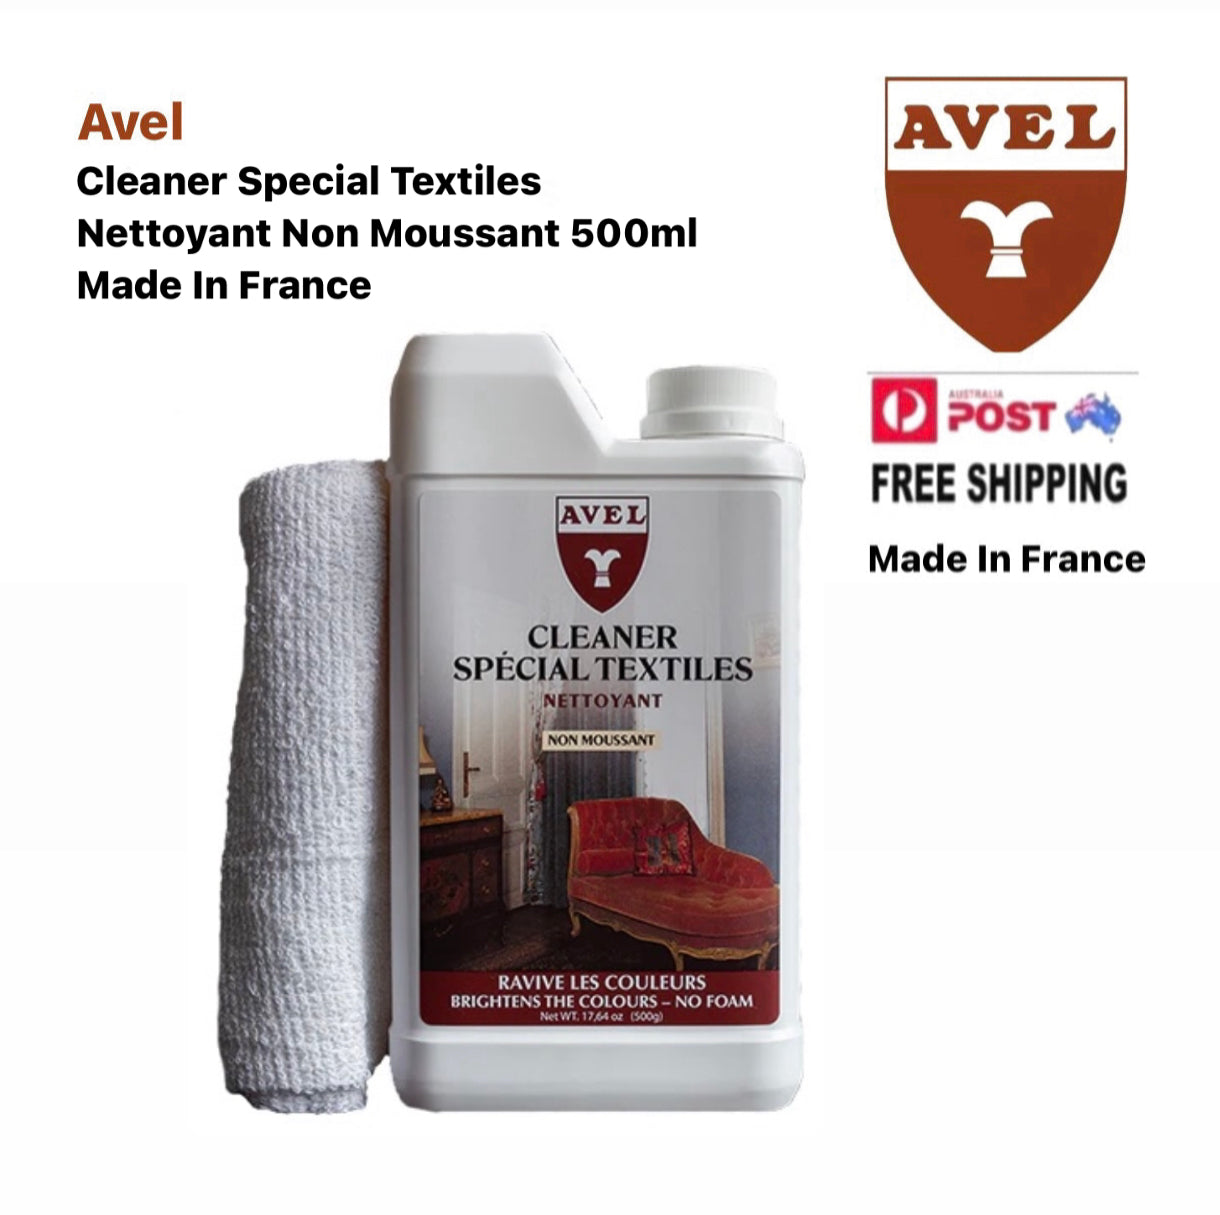 Avel Cleaner Special Textiles Colour Revive Nettoyant Non Moussant 500ml Made In France